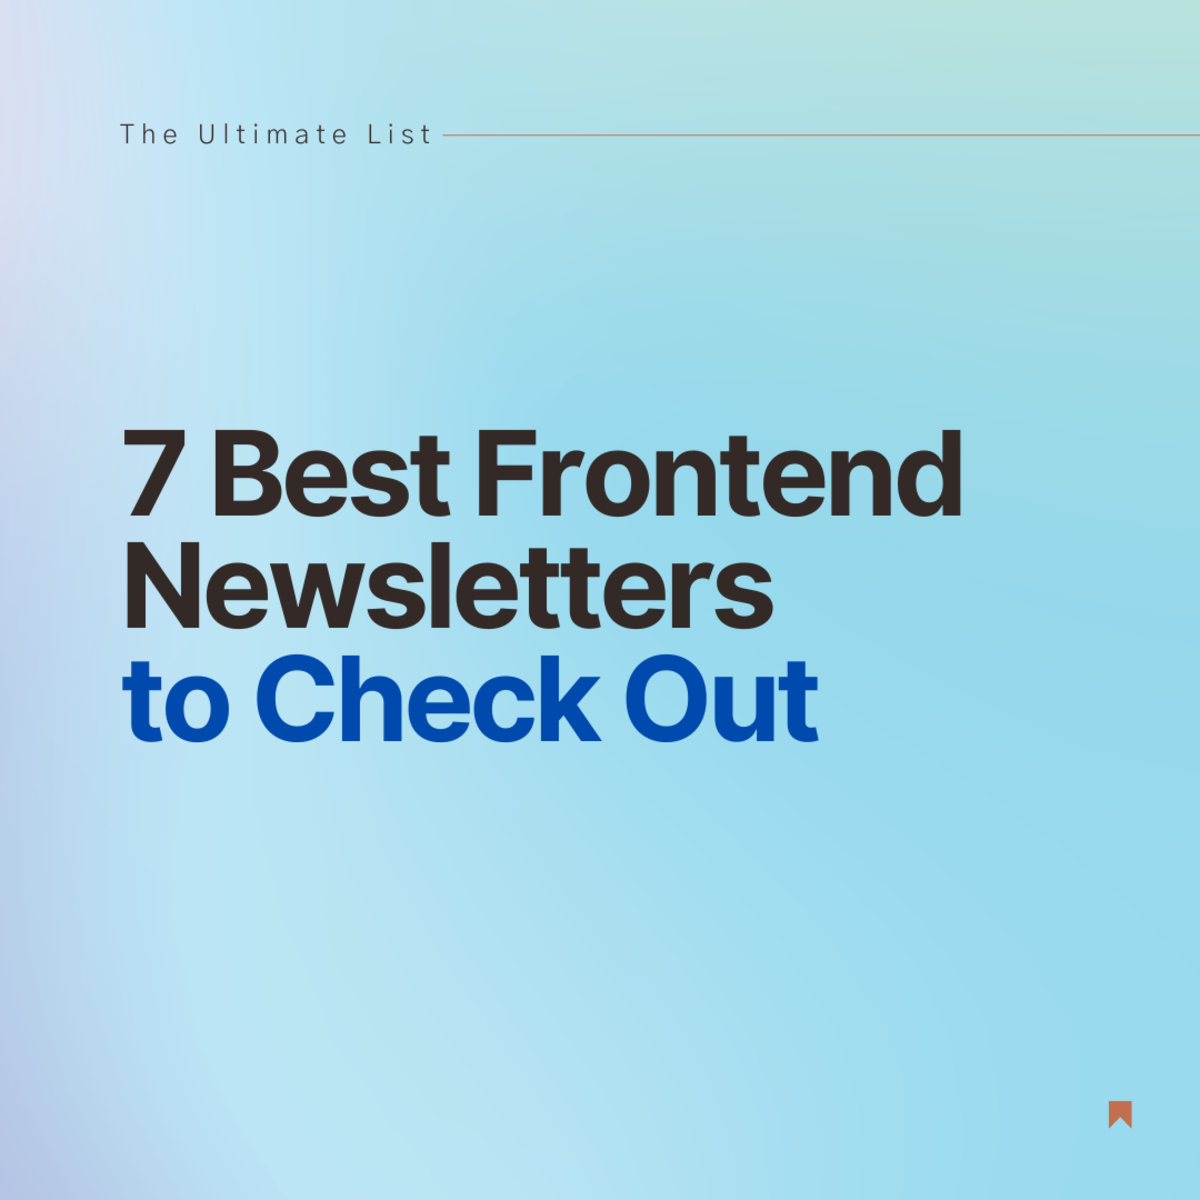 7 Best Frontend Newsletters to Check Out: The Ultimate List